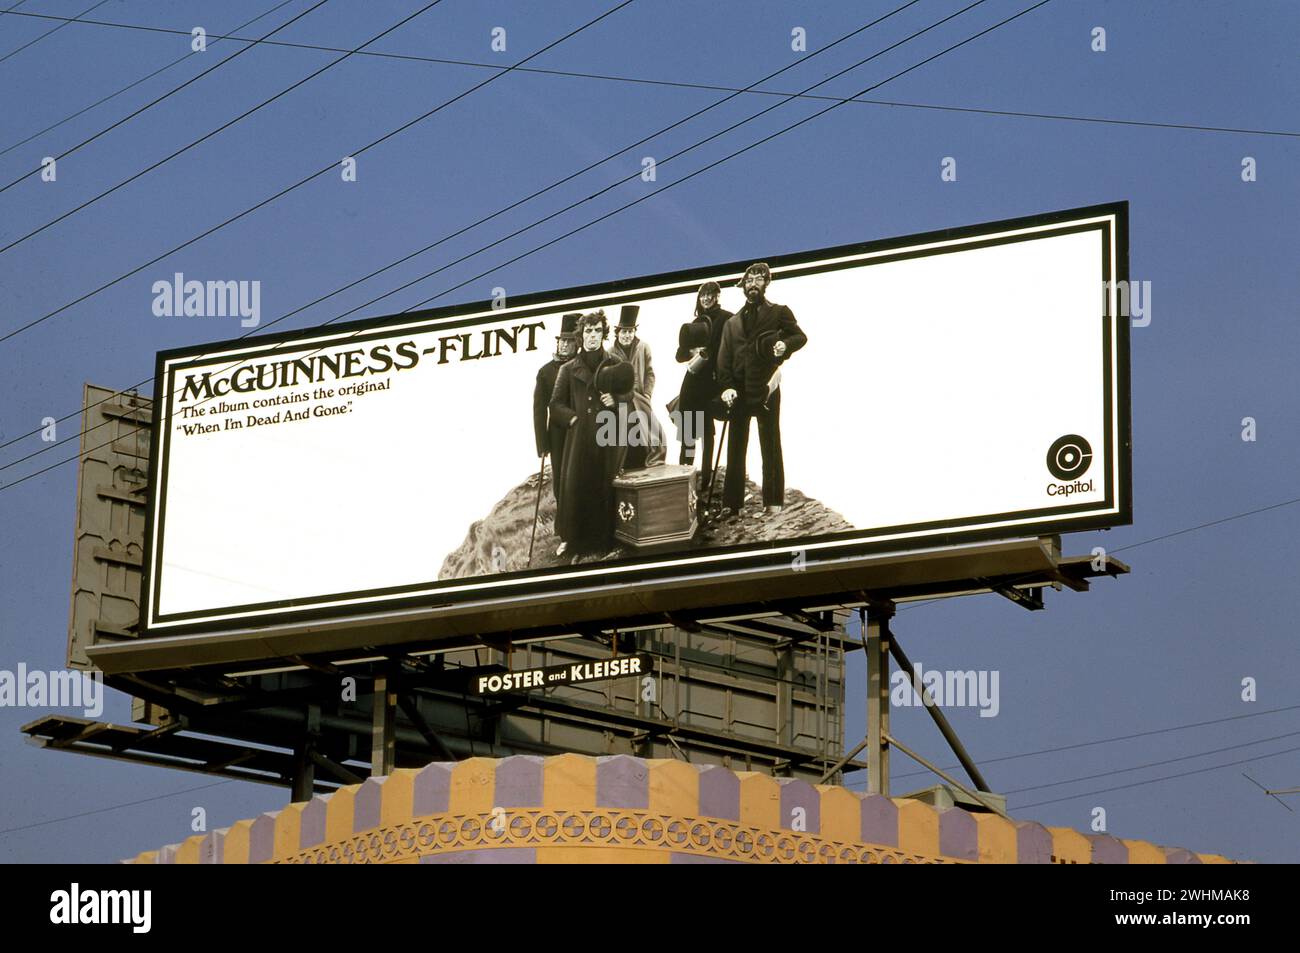 McGuinness-Flint, billboard, 1971, Capitol, record, records, album, 1970s, music, group, band, 1970s, Sunset Strip, Los Angeles, California, USA, America, American, rock, rock and roll, popular, West Hollywood, L.A., hippies, Stock Photo